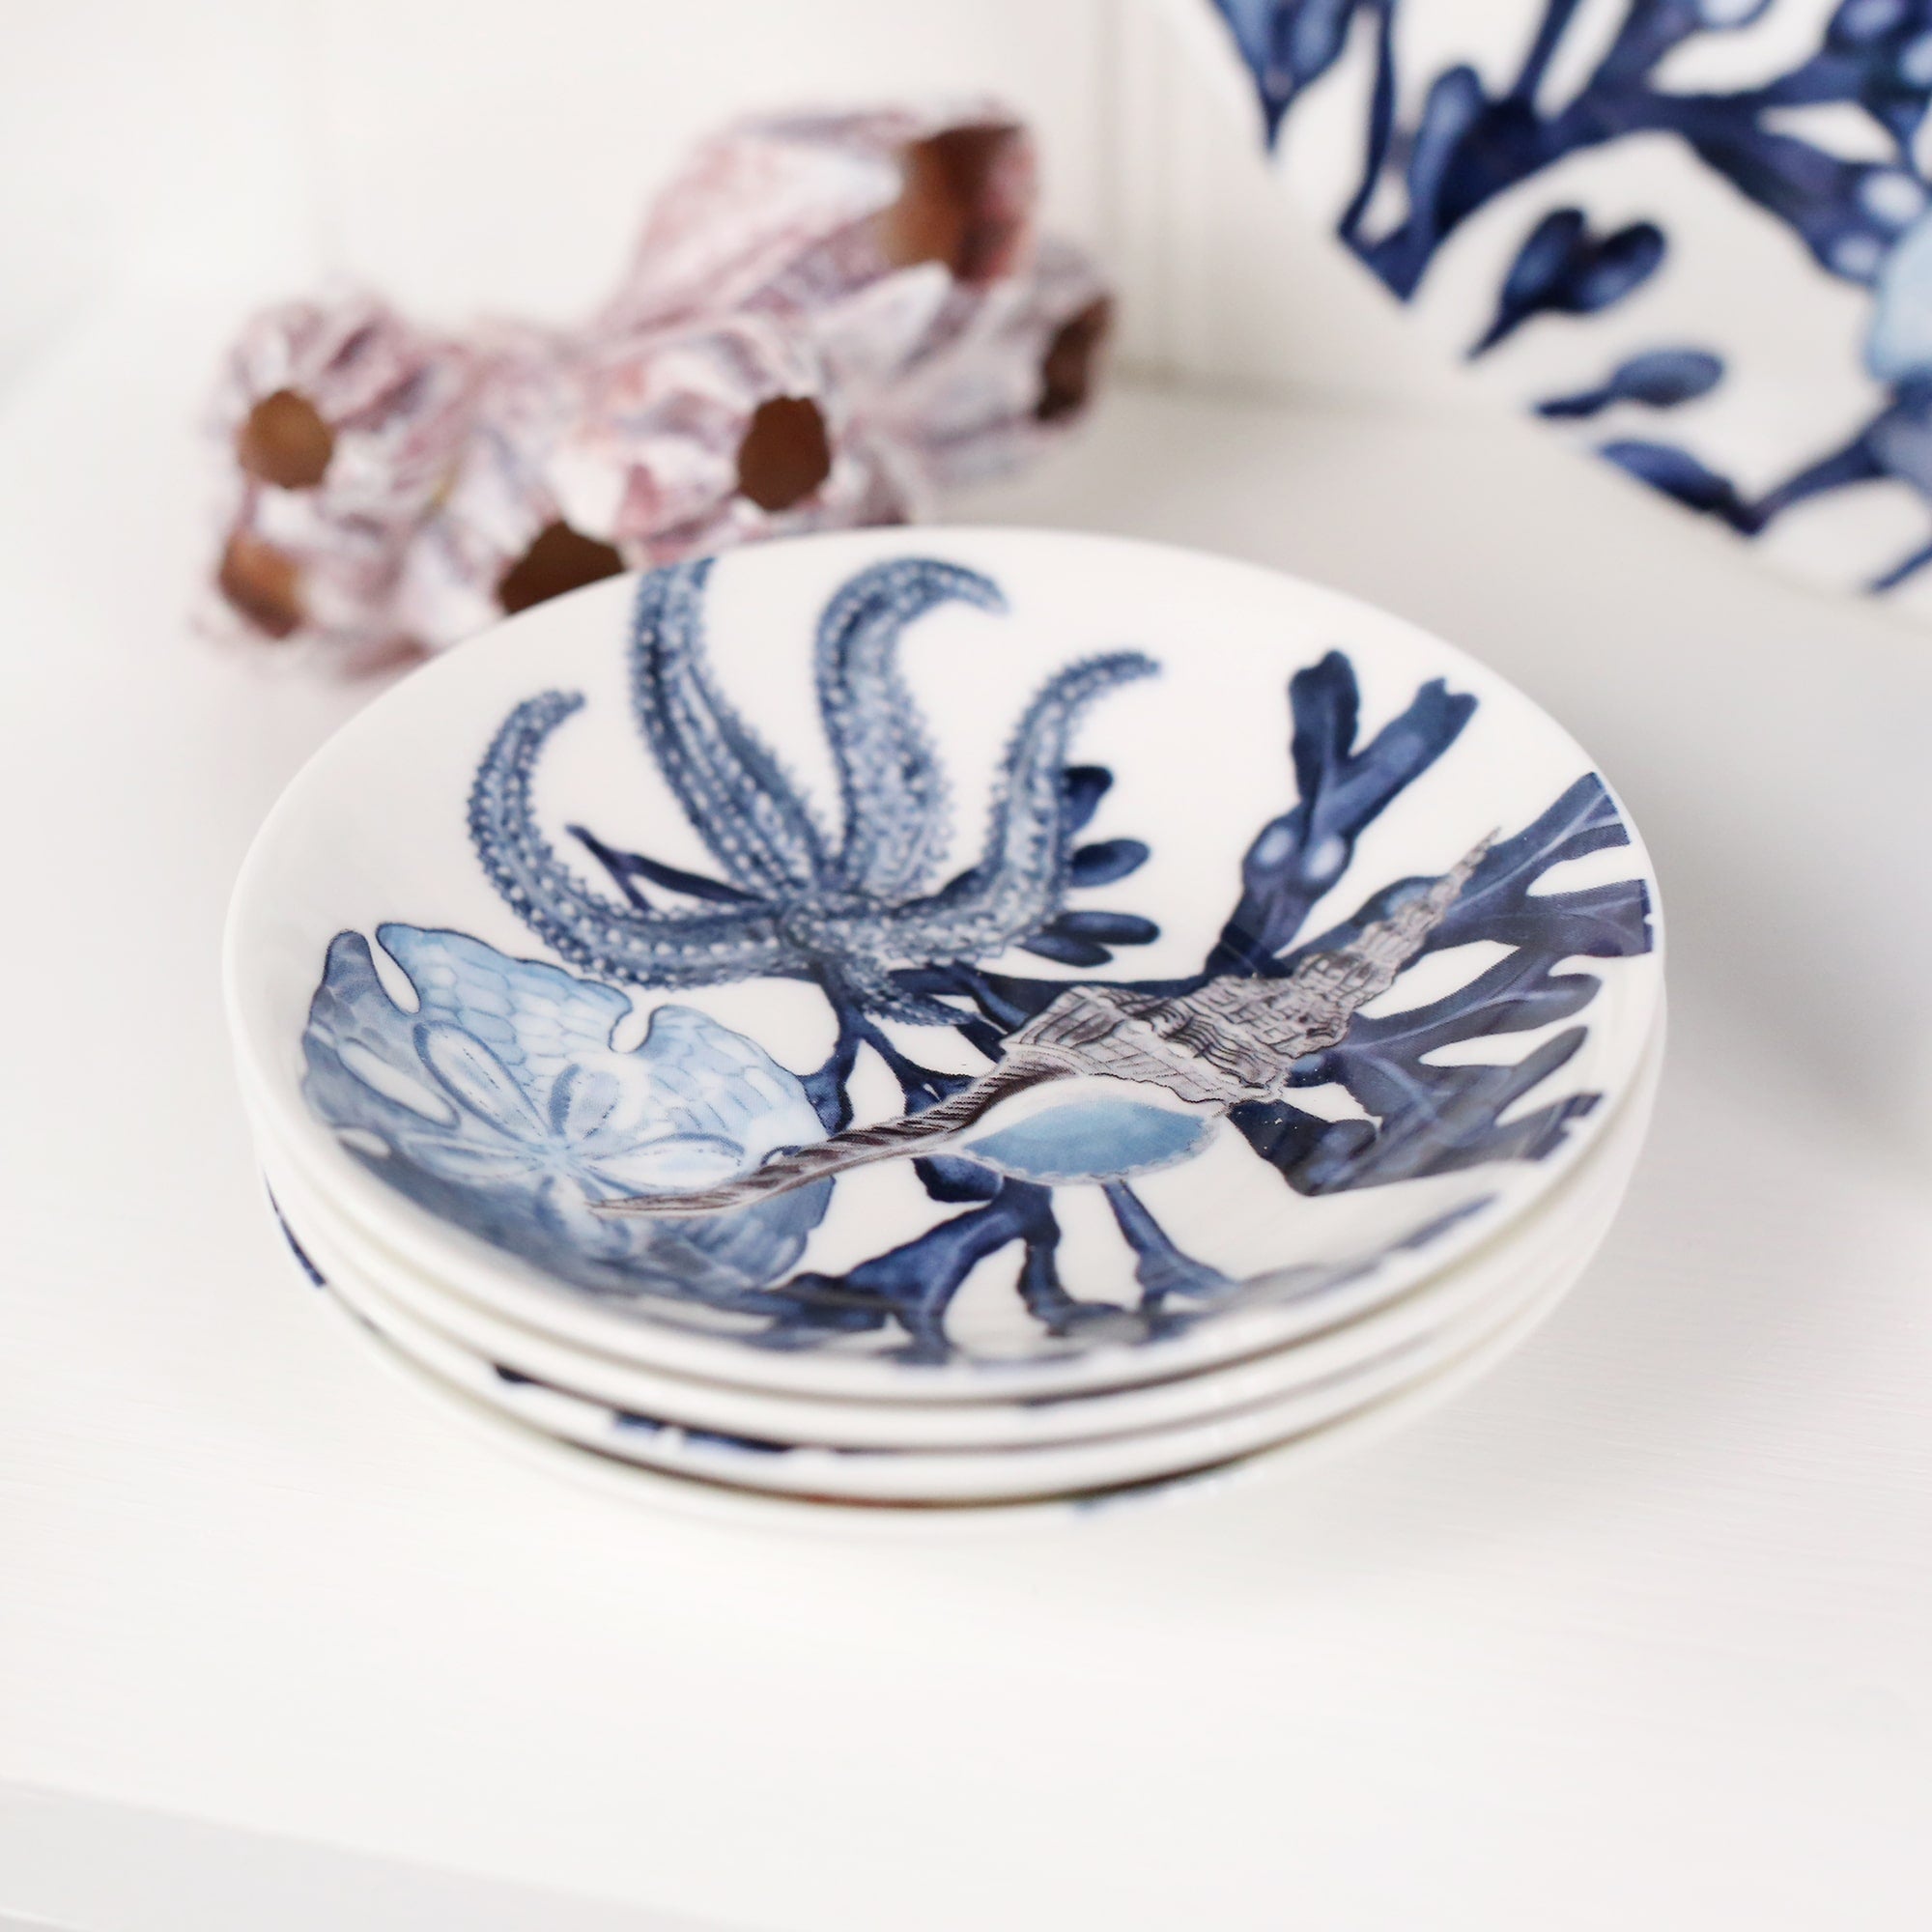 Nibbles bowl in Bone China in our  Seashell Beachcomber range in Navy and white in a Starfish,seaweed and shells design in a stack